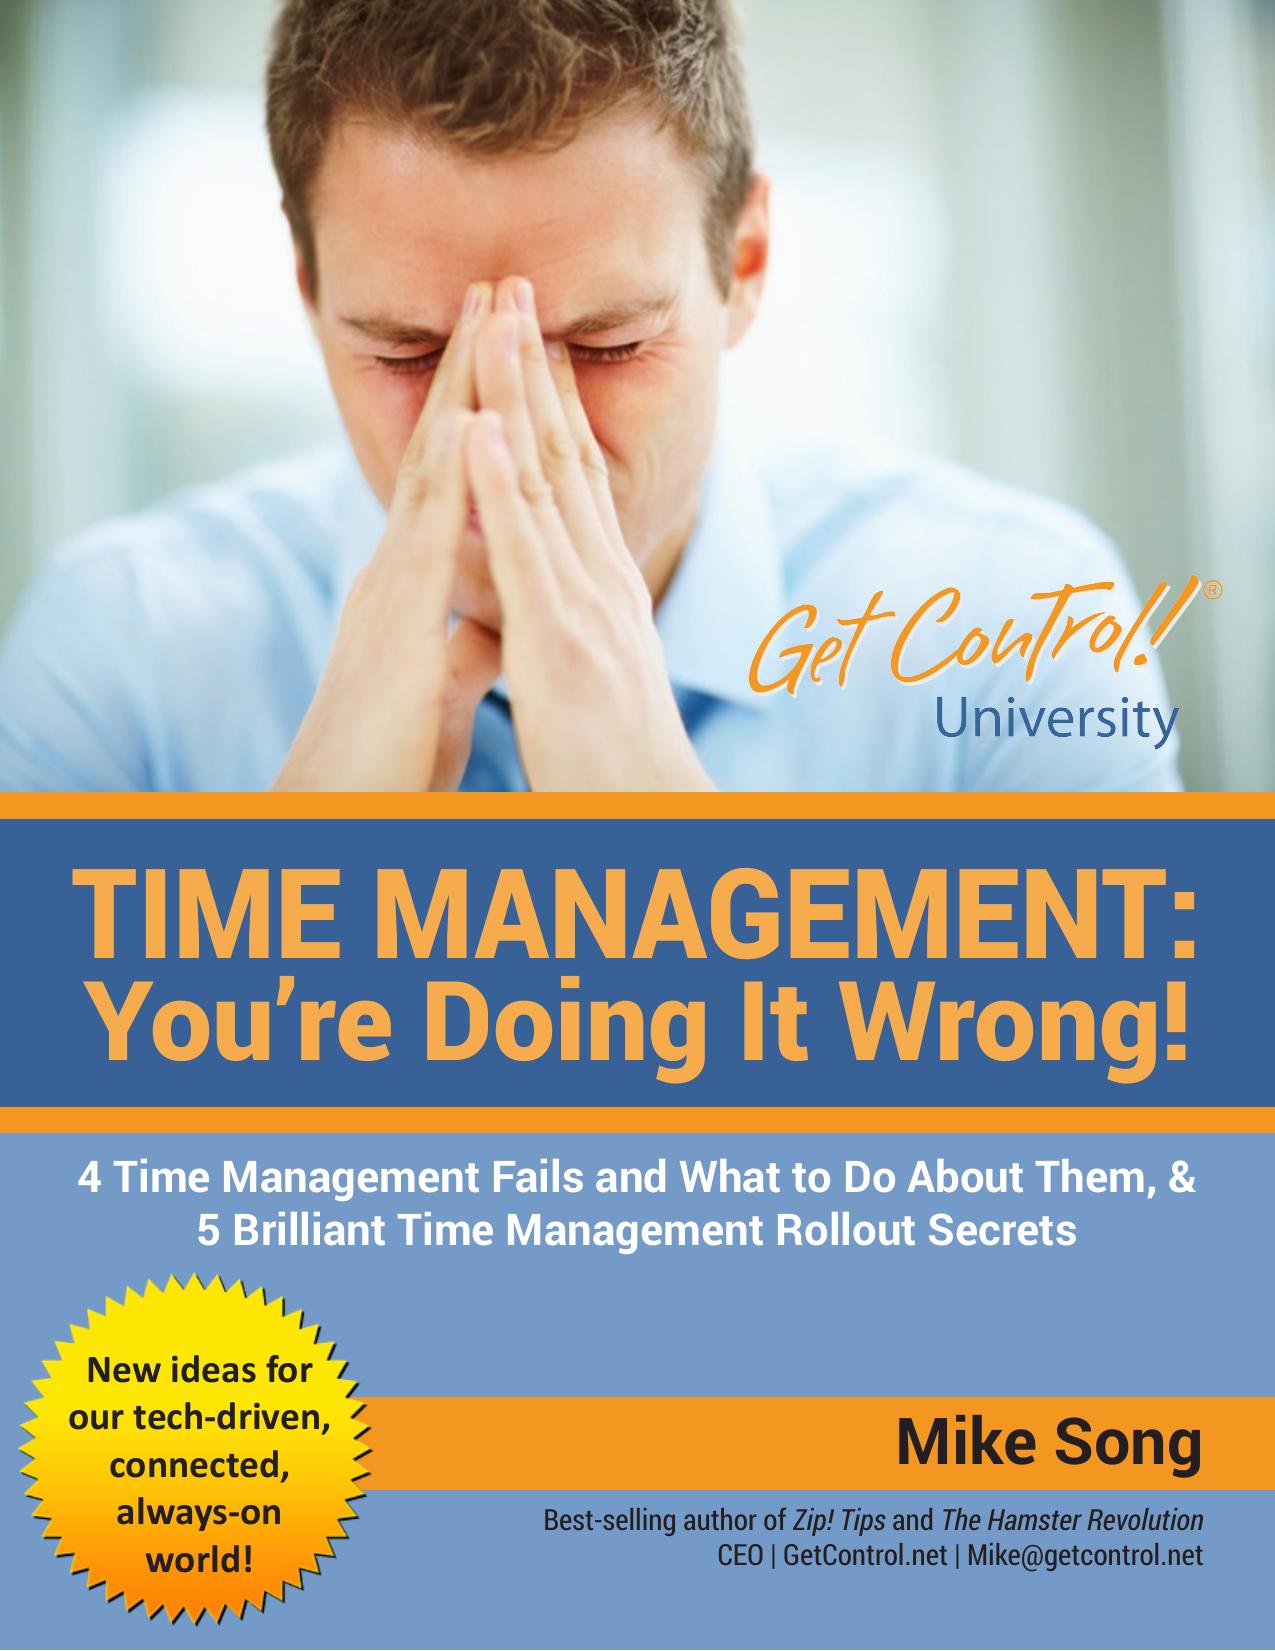 Time Management - You're Doing It Wrong!